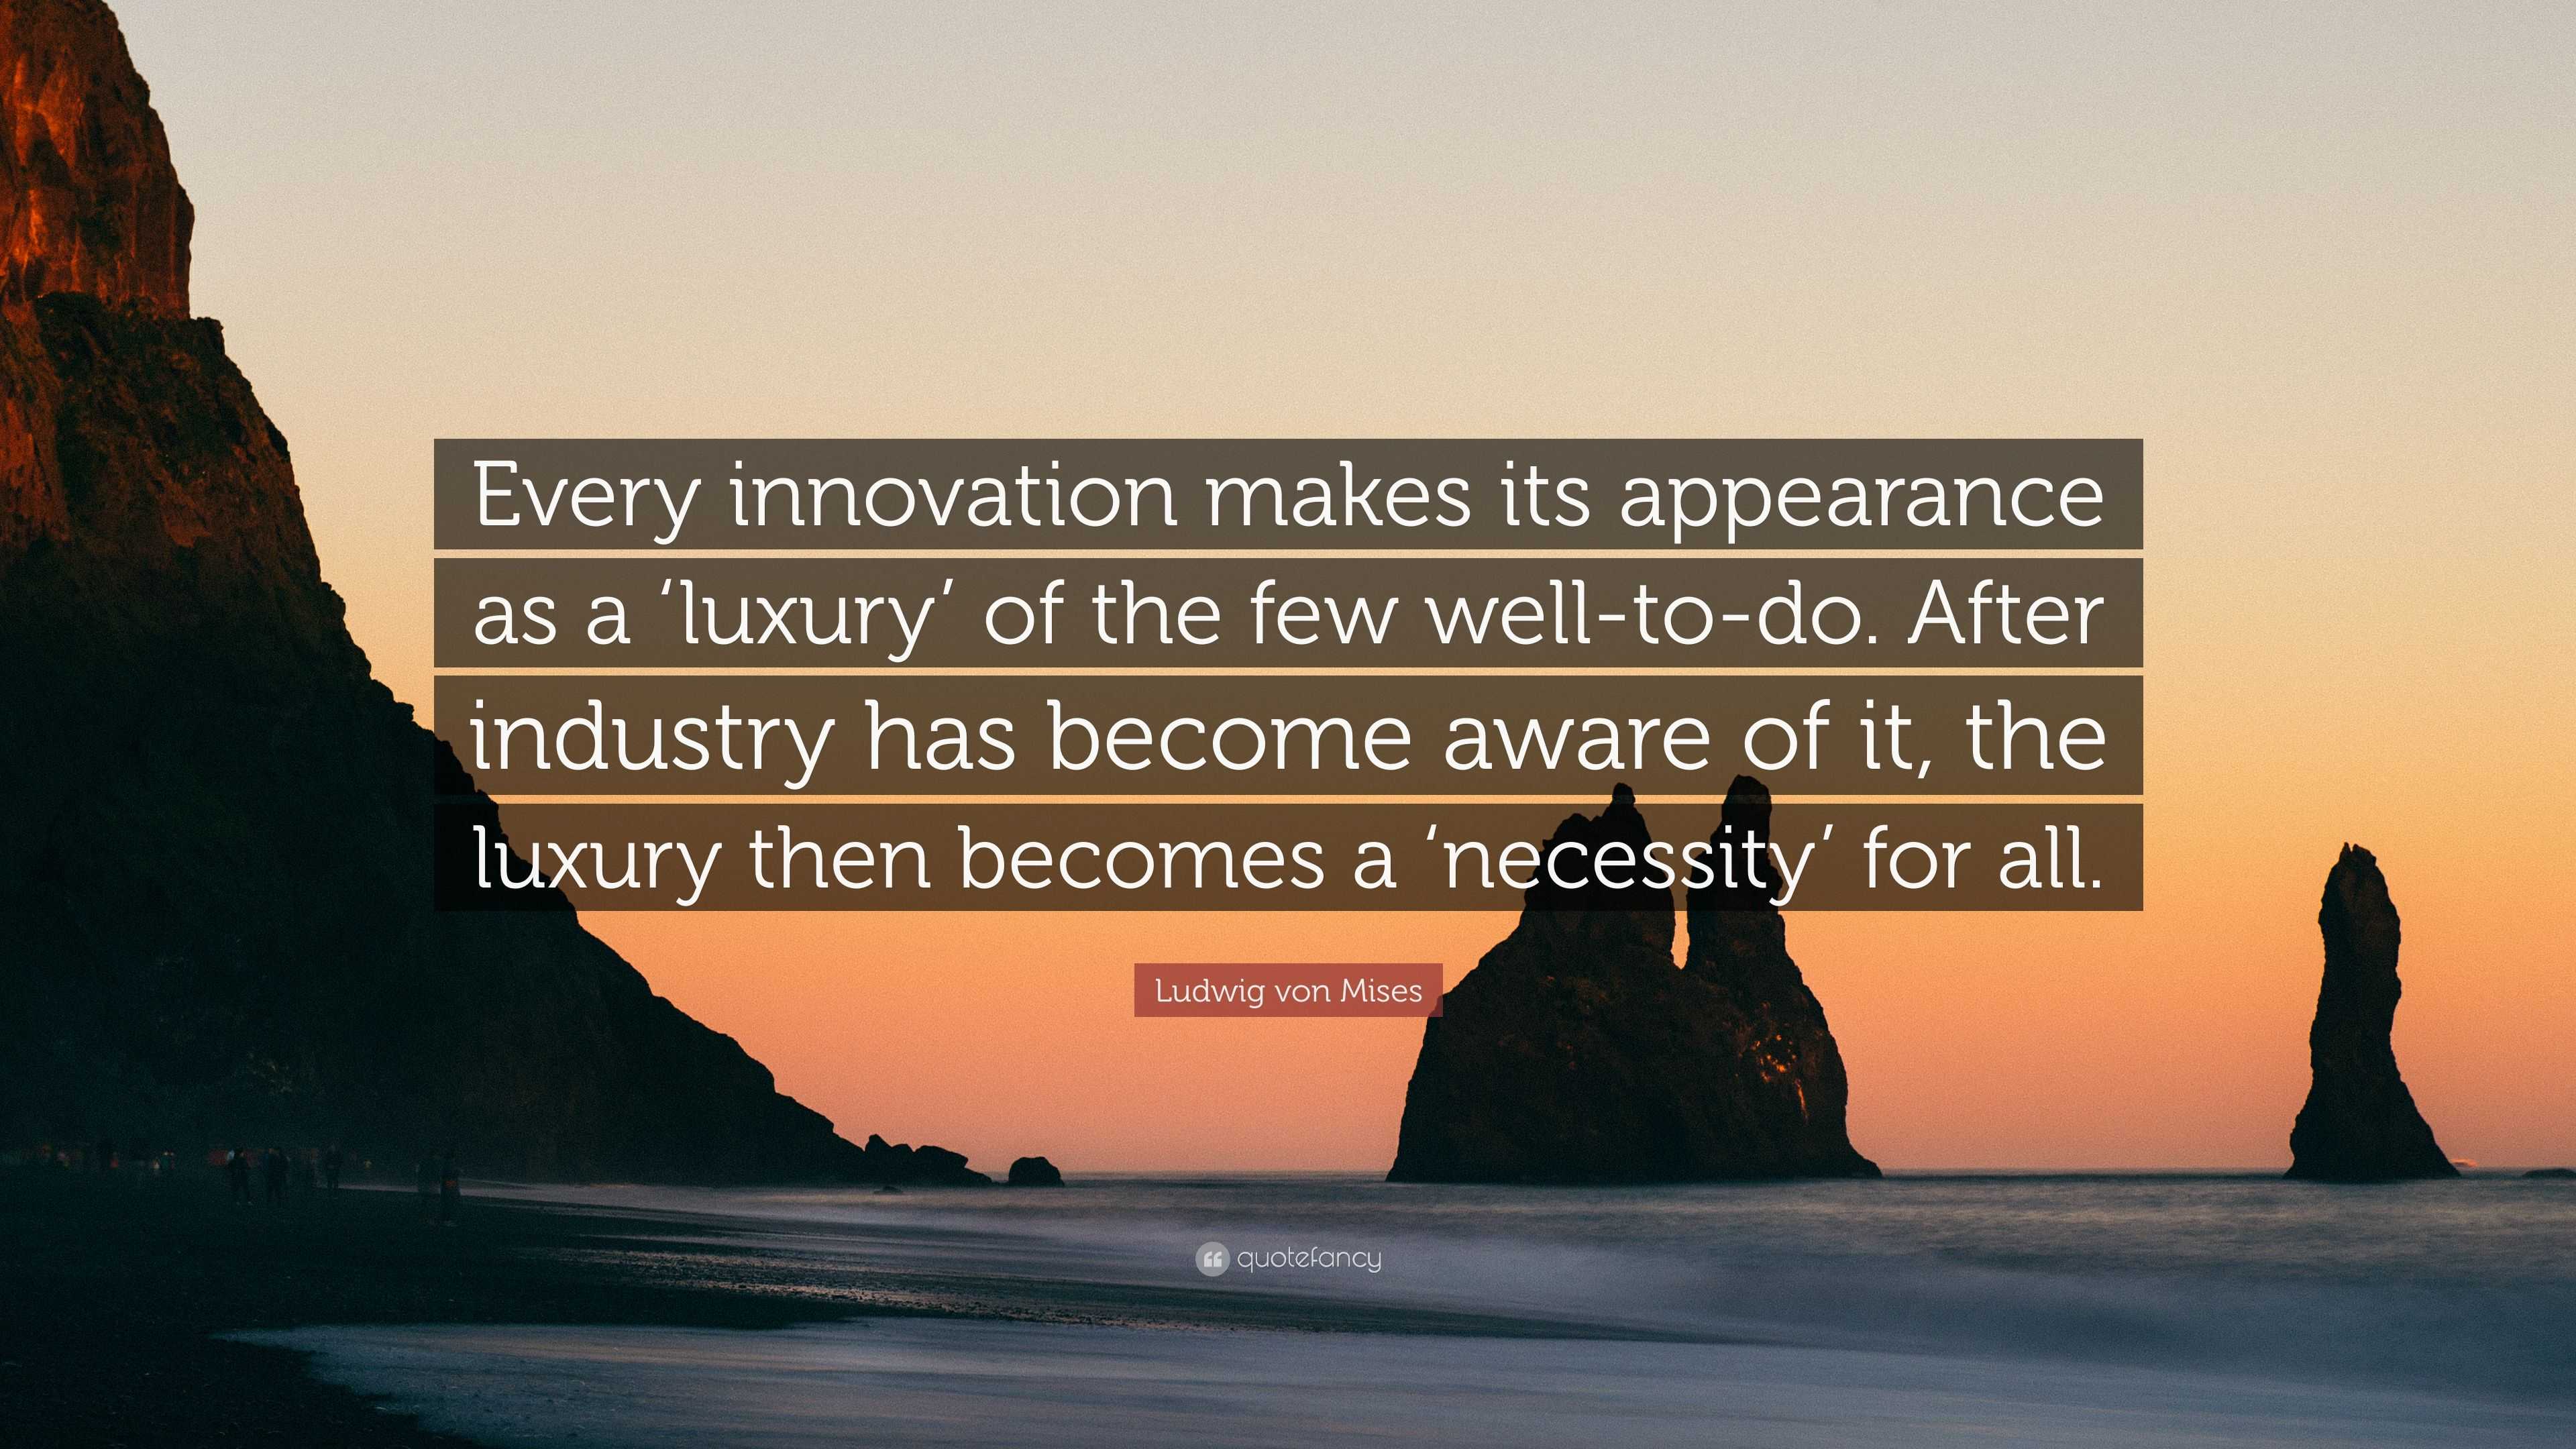 Ludwig von Mises Quote: “Every innovation makes its appearance as a 'luxury'  of the few well-to-do. After industry has become aware of it, the lu”